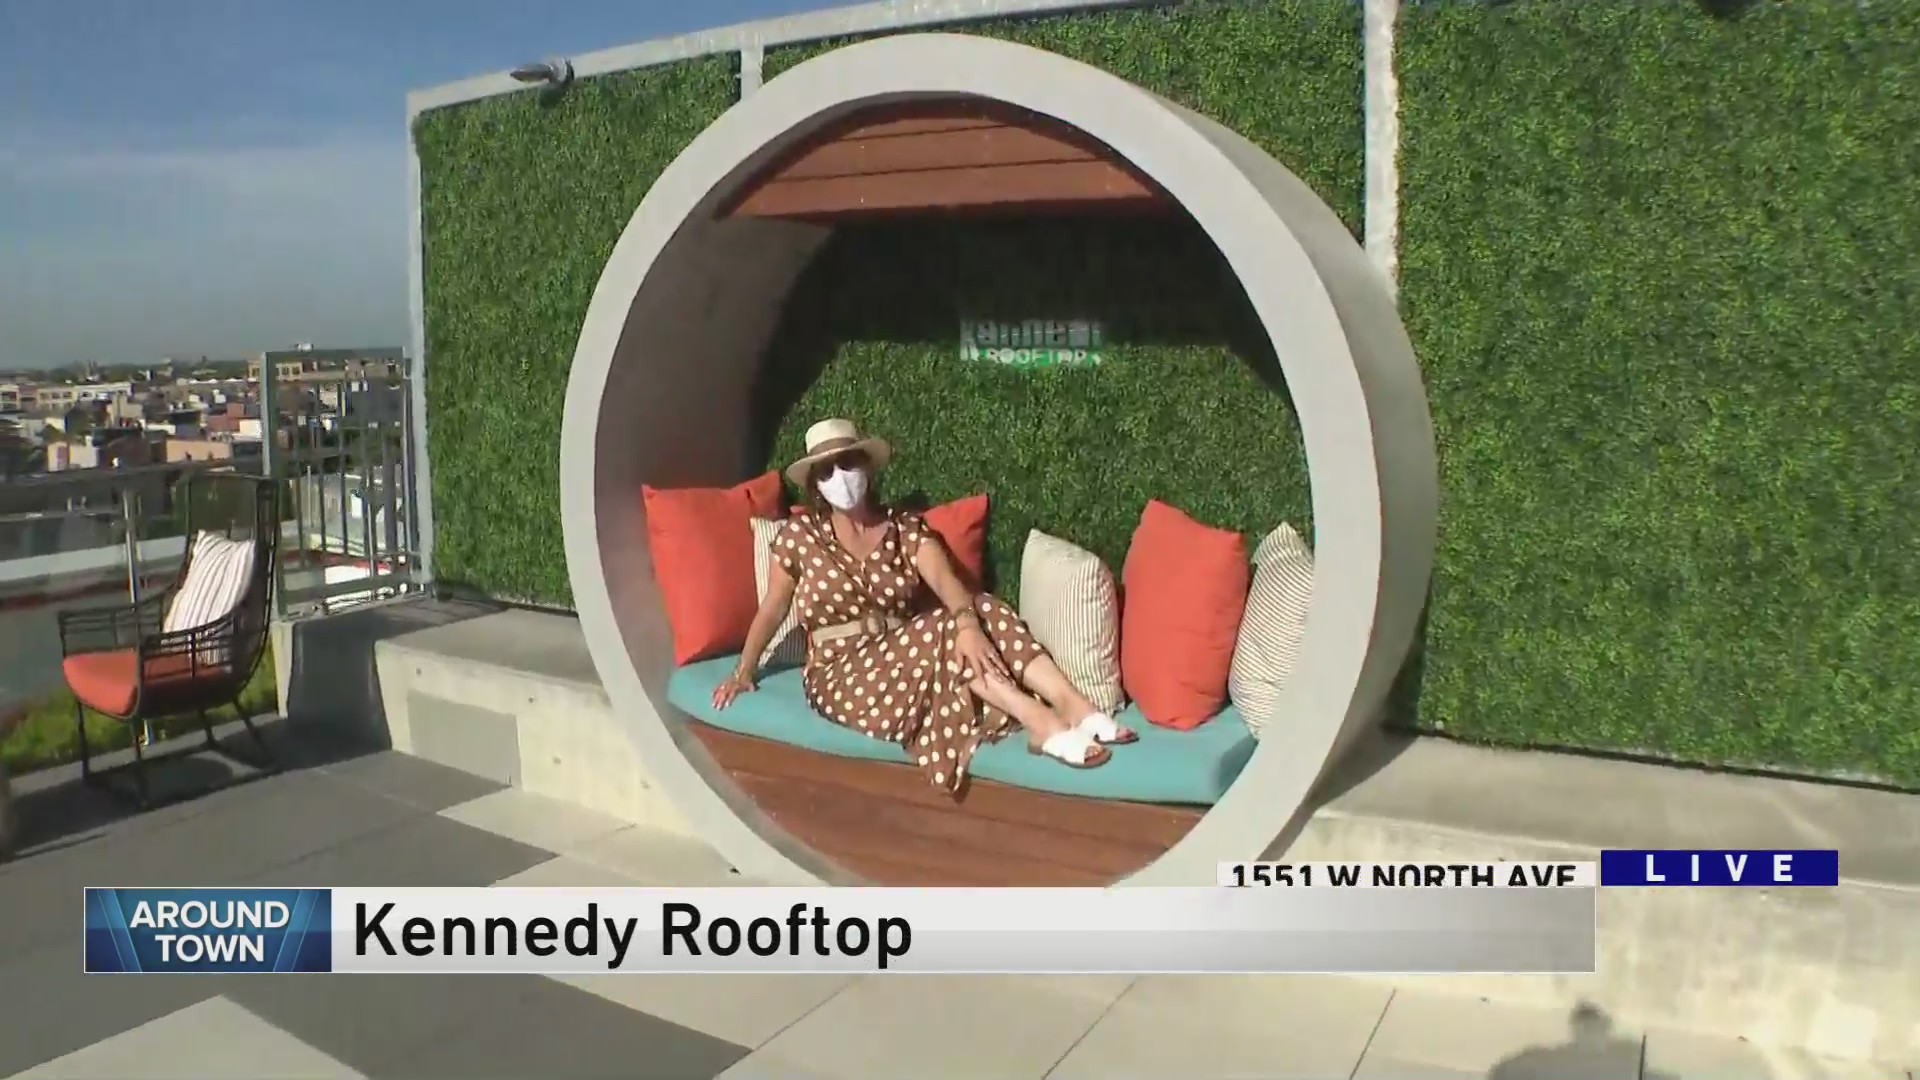 Around Town checks out the Kennedy Rooftop